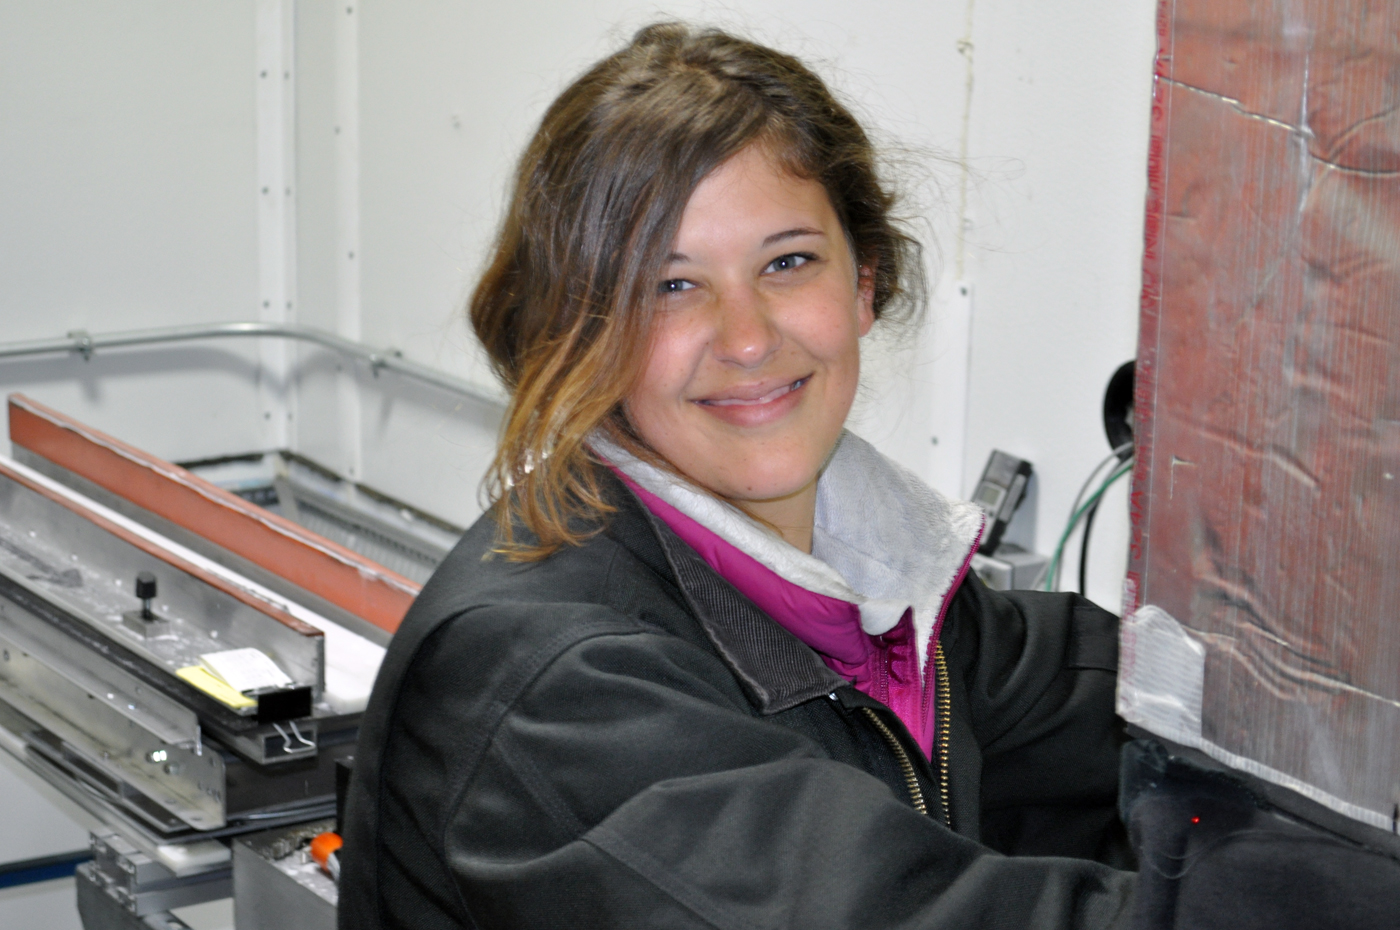 Jen Lennon during the 2011 WAIS Divide core processing line at the NICL